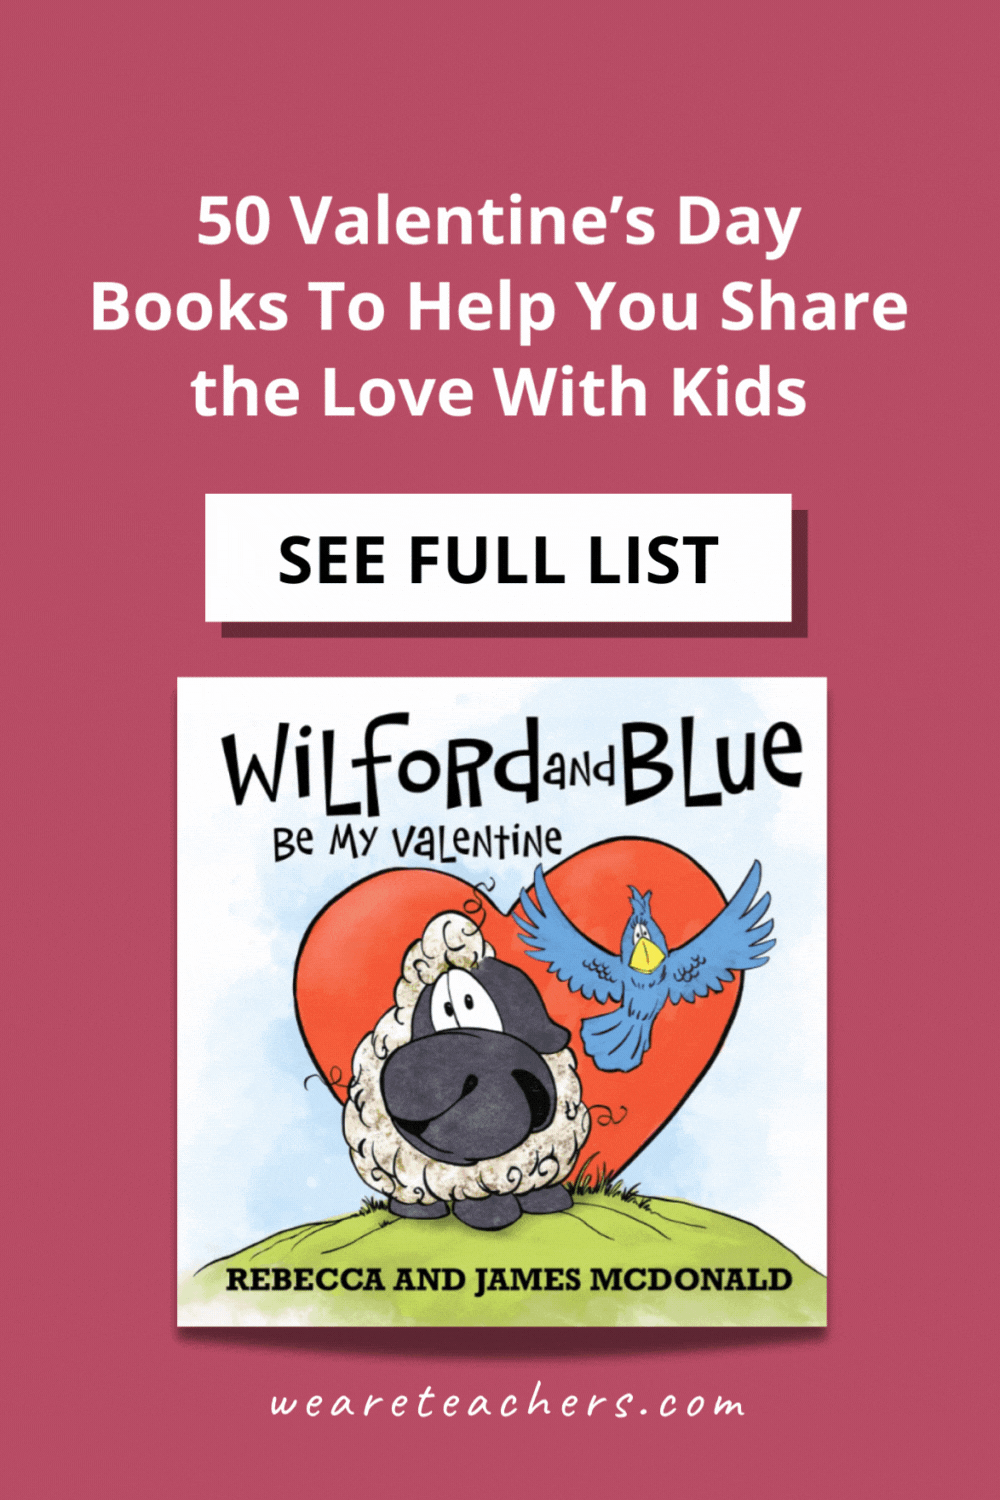 Make February 14 a special day by reading some of these sweet and loving Valentine's Day books, perfect for the pre-K and elementary crowd.